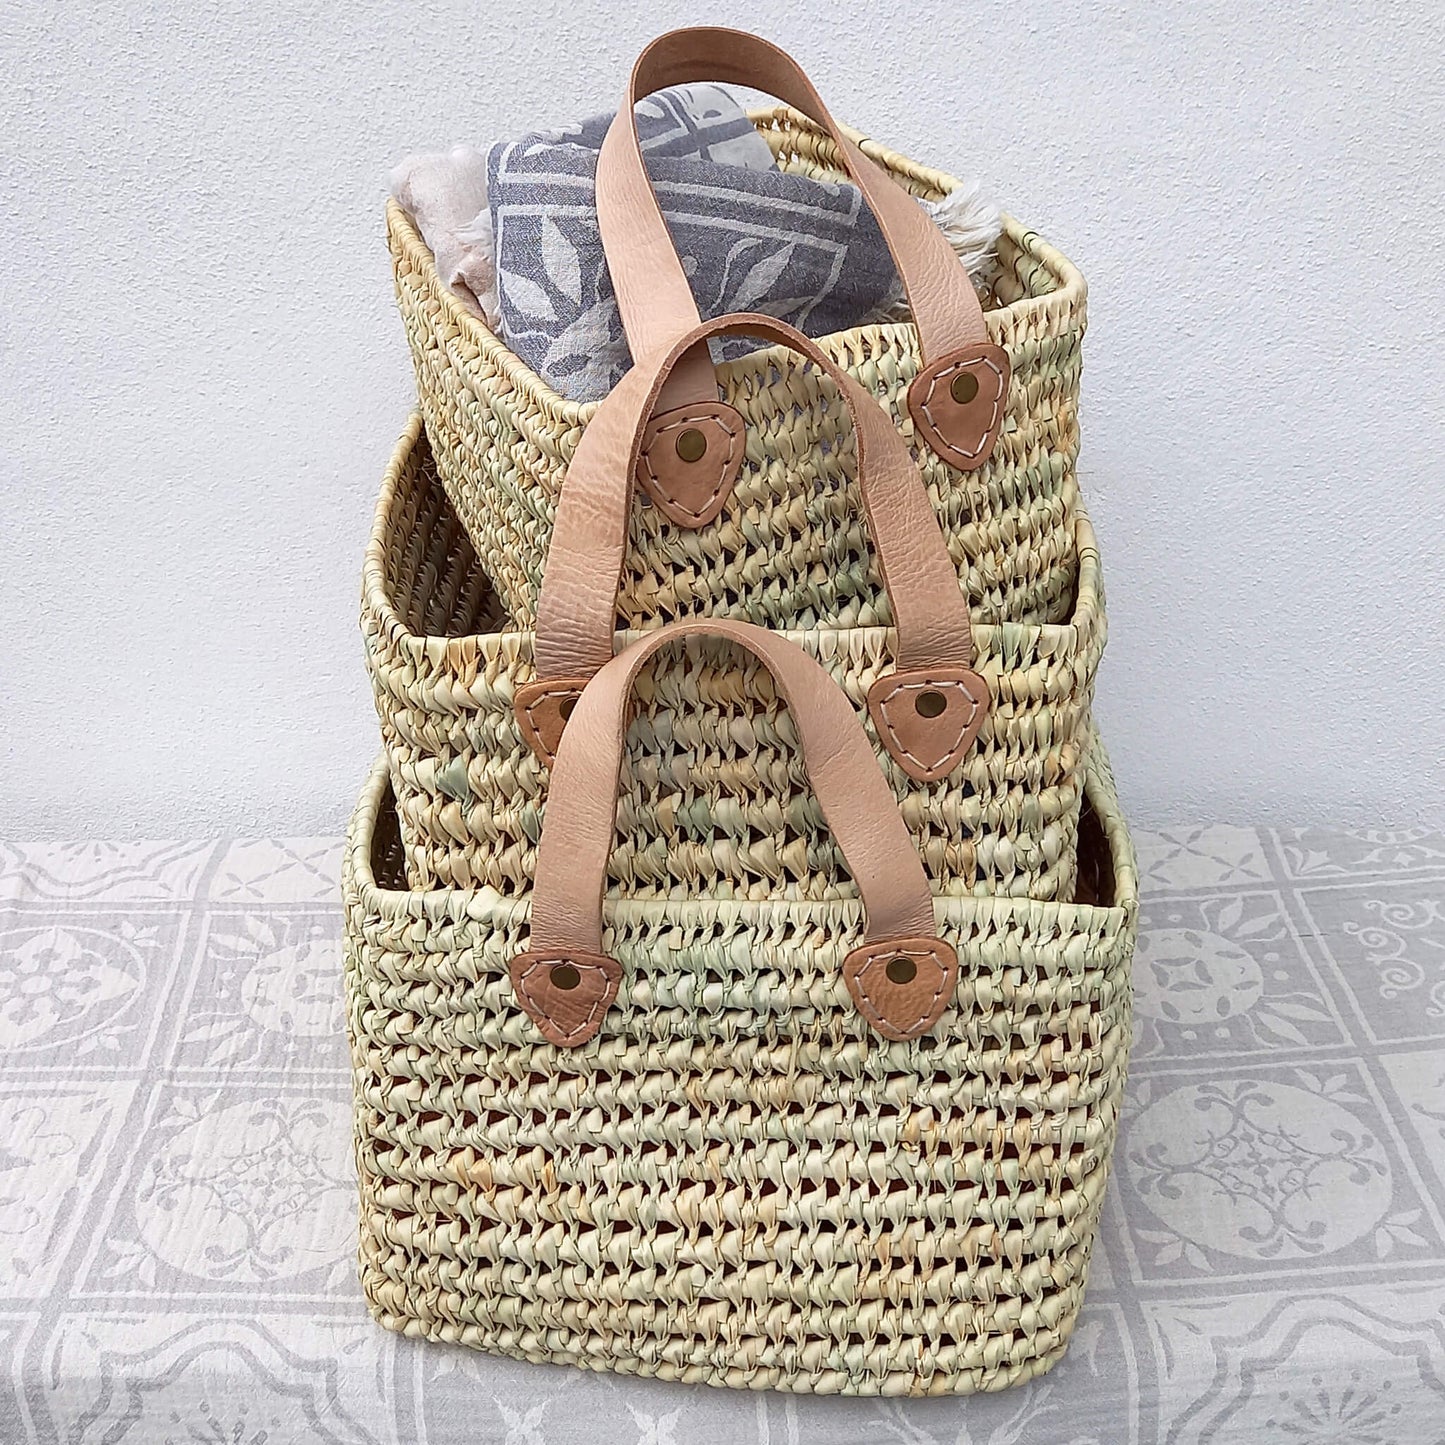 Basket Gap 3 sizes natural and handwoven - Unik by Nature